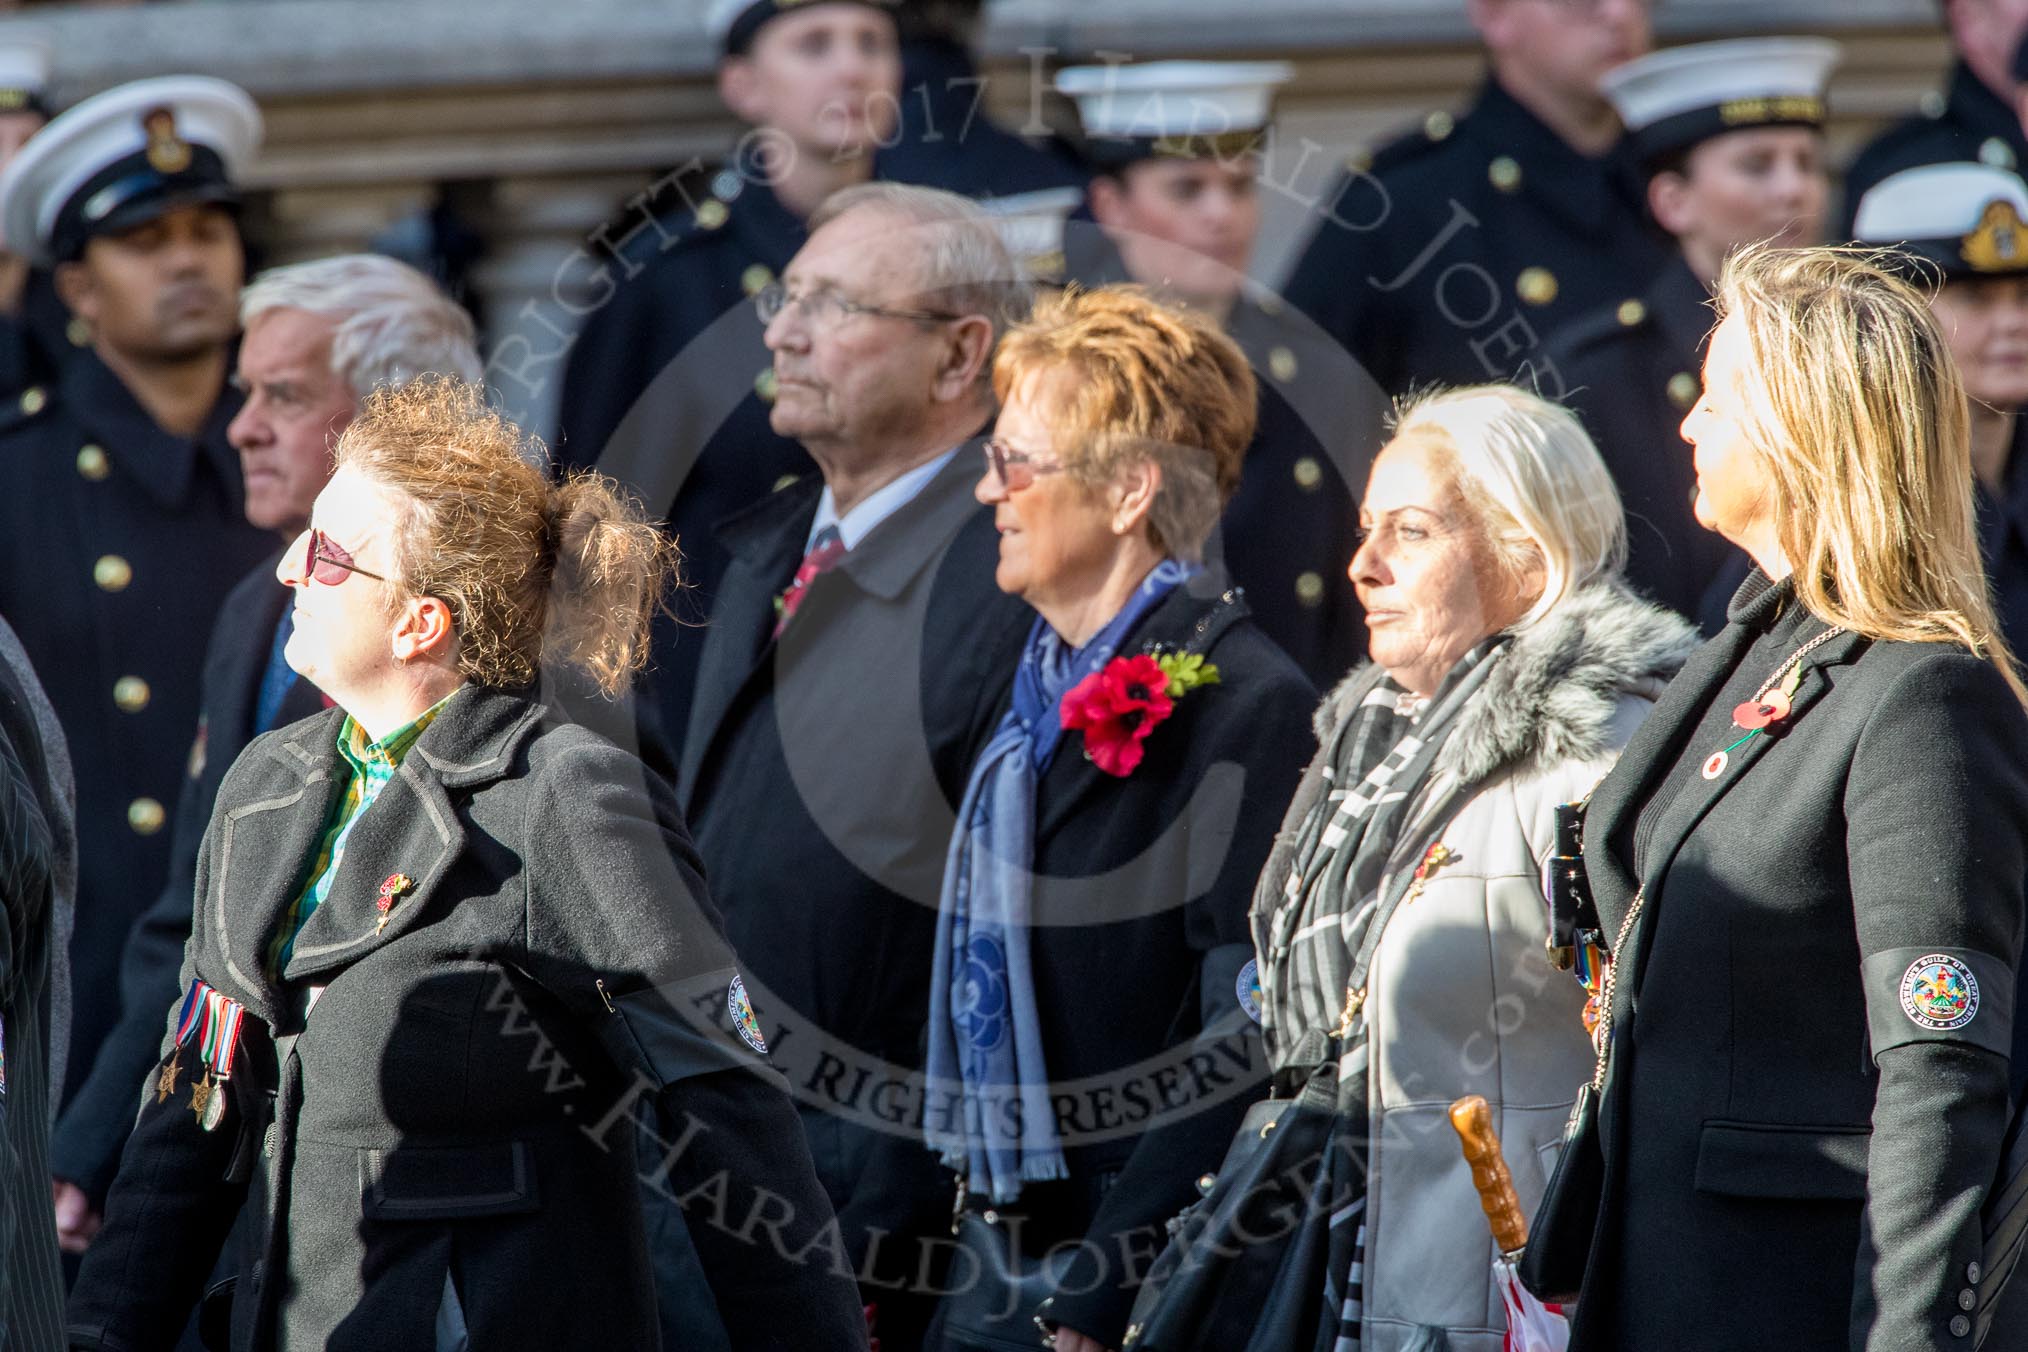 The Showmen's Guild of Great Britain (Group M18, 26 members) during the Royal British Legion March Past on Remembrance Sunday at the Cenotaph, Whitehall, Westminster, London, 11 November 2018, 12:27.